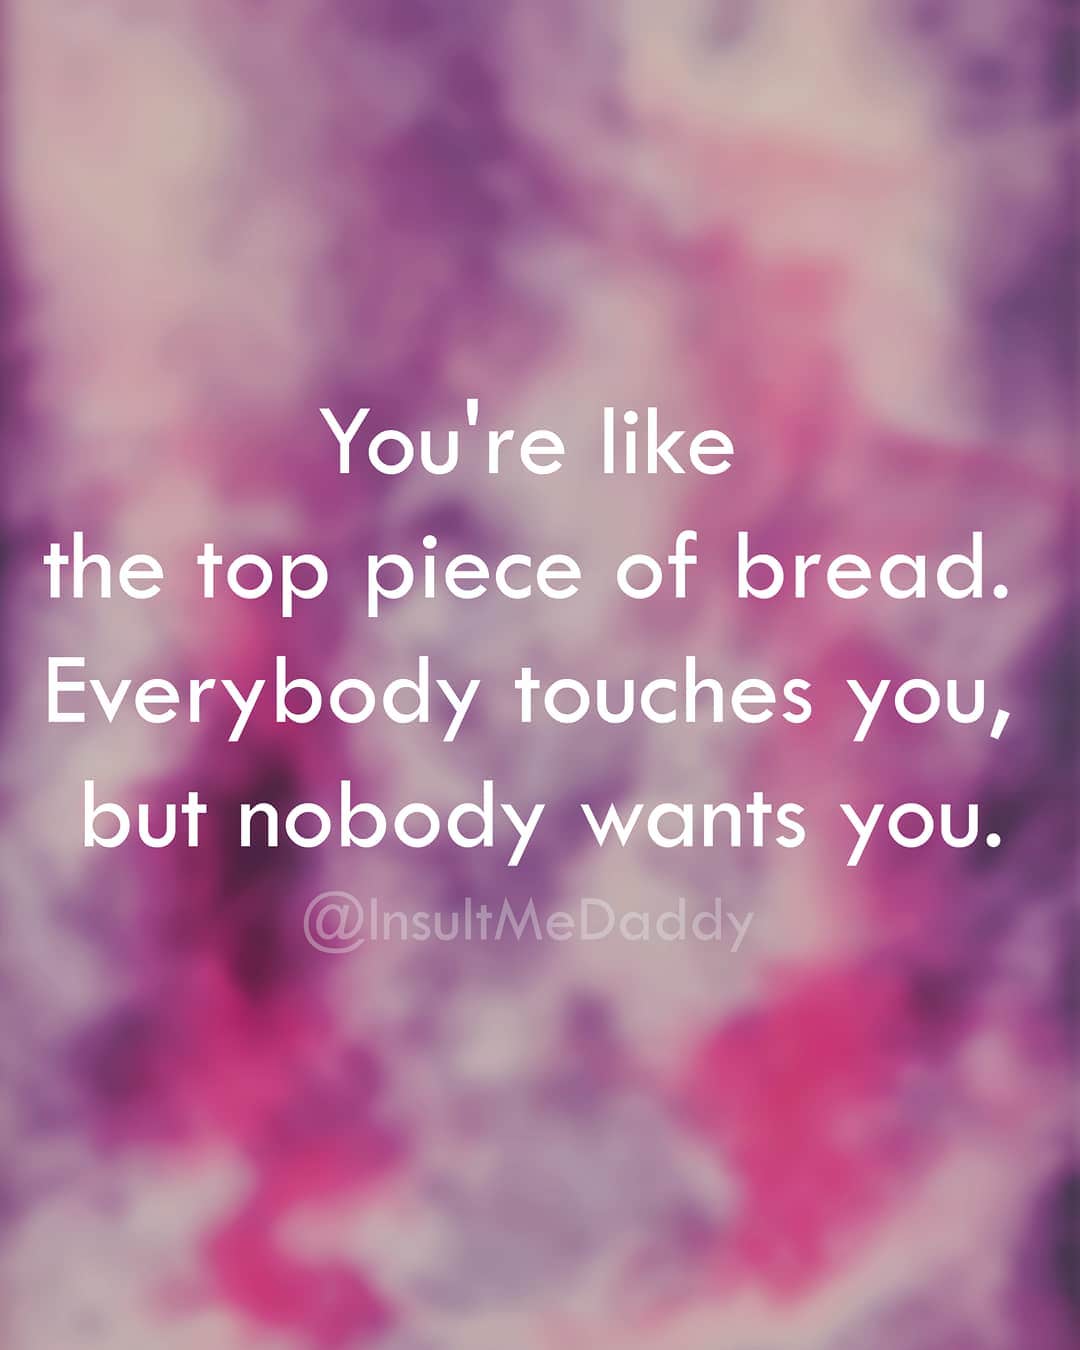 savage top insults - You're the top piece of bread. Everybody touches you, but nobody wants you.